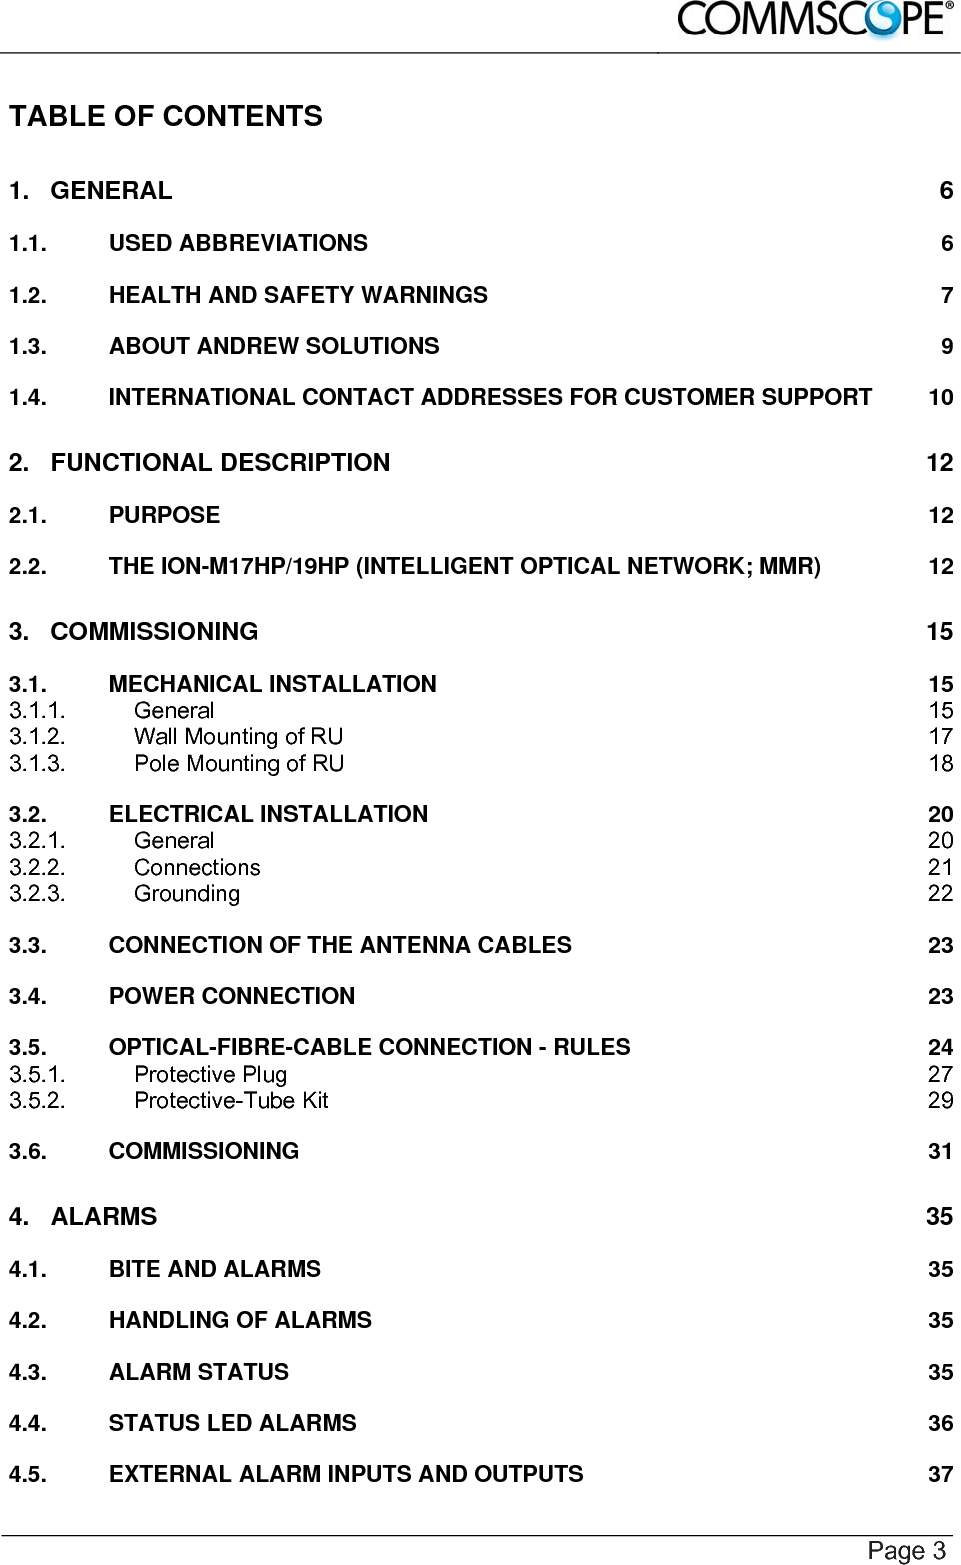    Page 3 TABLE OF CONTENTS 1. GENERAL  6 1.1. USED ABBREVIATIONS  6 1.2. HEALTH AND SAFETY WARNINGS  7 1.3. ABOUT ANDREW SOLUTIONS  9 1.4. INTERNATIONAL CONTACT ADDRESSES FOR CUSTOMER SUPPORT  10 2. FUNCTIONAL DESCRIPTION  12 2.1. PURPOSE  12 2.2. THE ION-M17HP/19HP (INTELLIGENT OPTICAL NETWORK; MMR)  12 3. COMMISSIONING  15 3.1. MECHANICAL INSTALLATION  15 3.1.1. General  15 3.1.2. Wall Mounting of RU  17 3.1.3. Pole Mounting of RU  18 3.2. ELECTRICAL INSTALLATION  20 3.2.1. General  20 3.2.2. Connections  21 3.2.3. Grounding  22 3.3. CONNECTION OF THE ANTENNA CABLES  23 3.4. POWER CONNECTION  23 3.5. OPTICAL-FIBRE-CABLE CONNECTION - RULES  24 3.5.1. Protective Plug  27 3.5.2. Protective-Tube Kit  29 3.6. COMMISSIONING  31 4. ALARMS 35 4.1. BITE AND ALARMS  35 4.2. HANDLING OF ALARMS  35 4.3. ALARM STATUS  35 4.4. STATUS LED ALARMS  36 4.5. EXTERNAL ALARM INPUTS AND OUTPUTS  37 